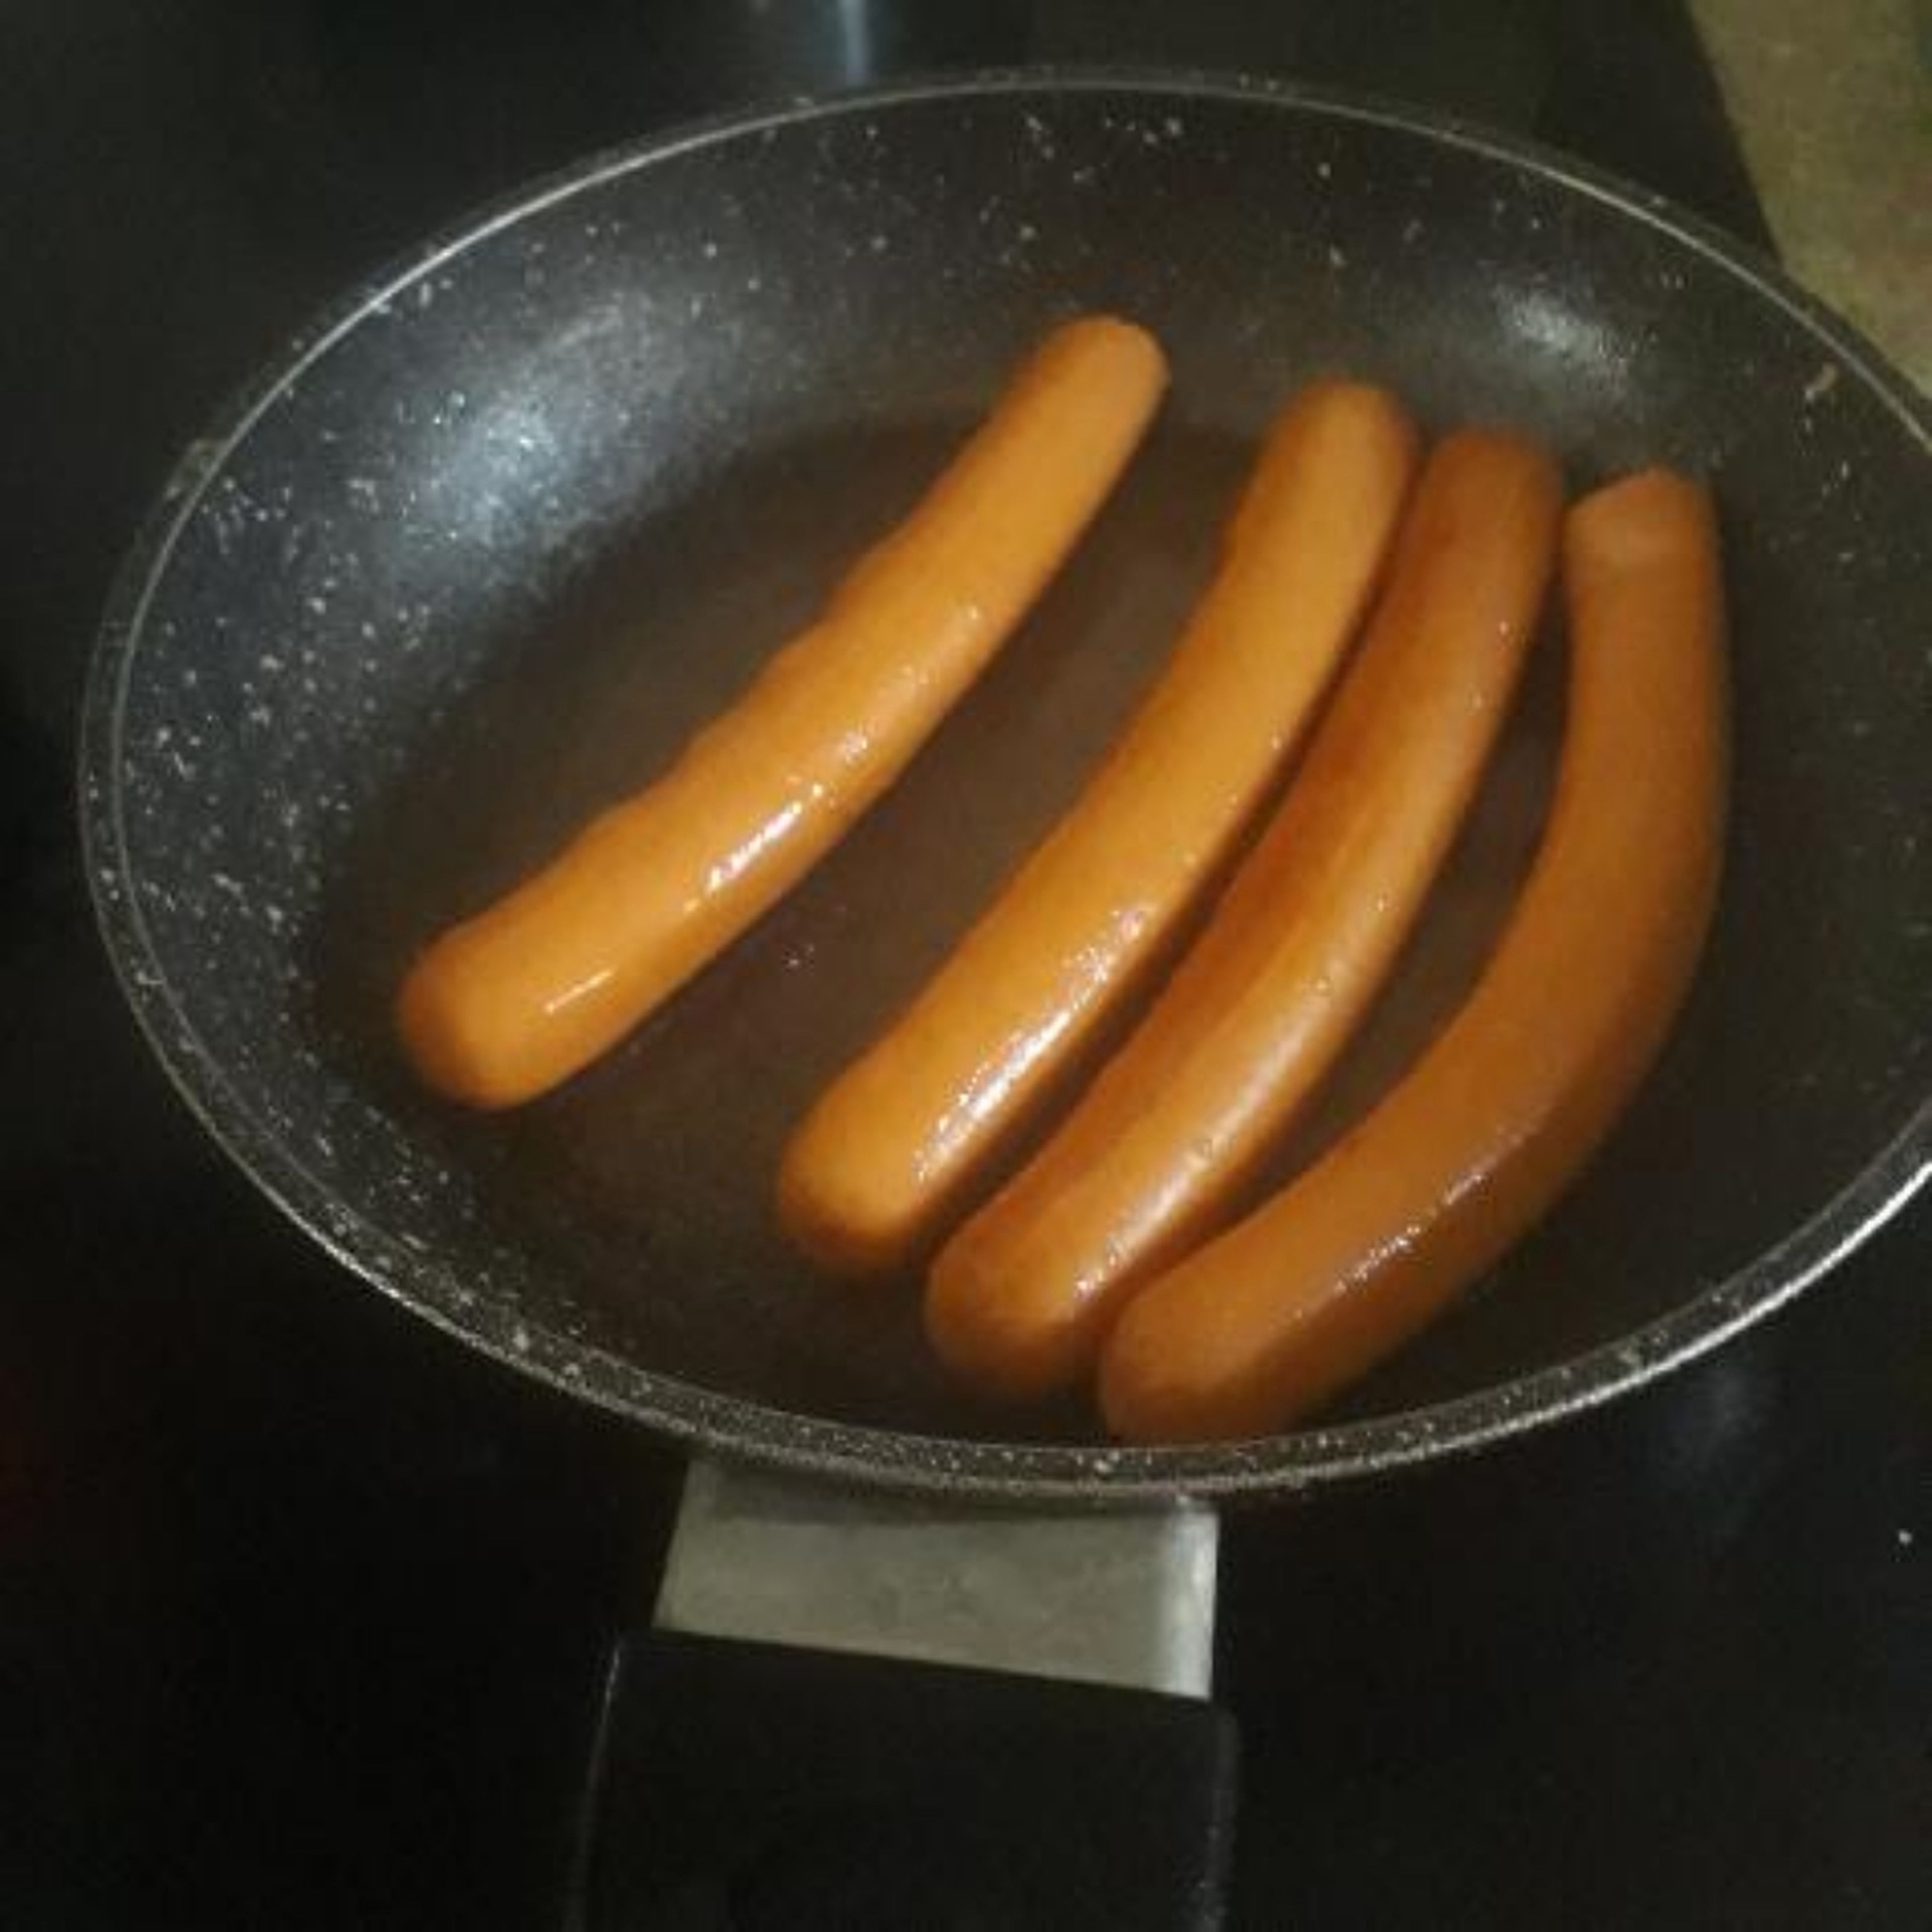 put 3 or 4 sausages in and turn the volume lower. wait till the sausages have a darker colour and heat coming, then turn them around and wait 4 min. once you have waited get a fork and place them on a plate